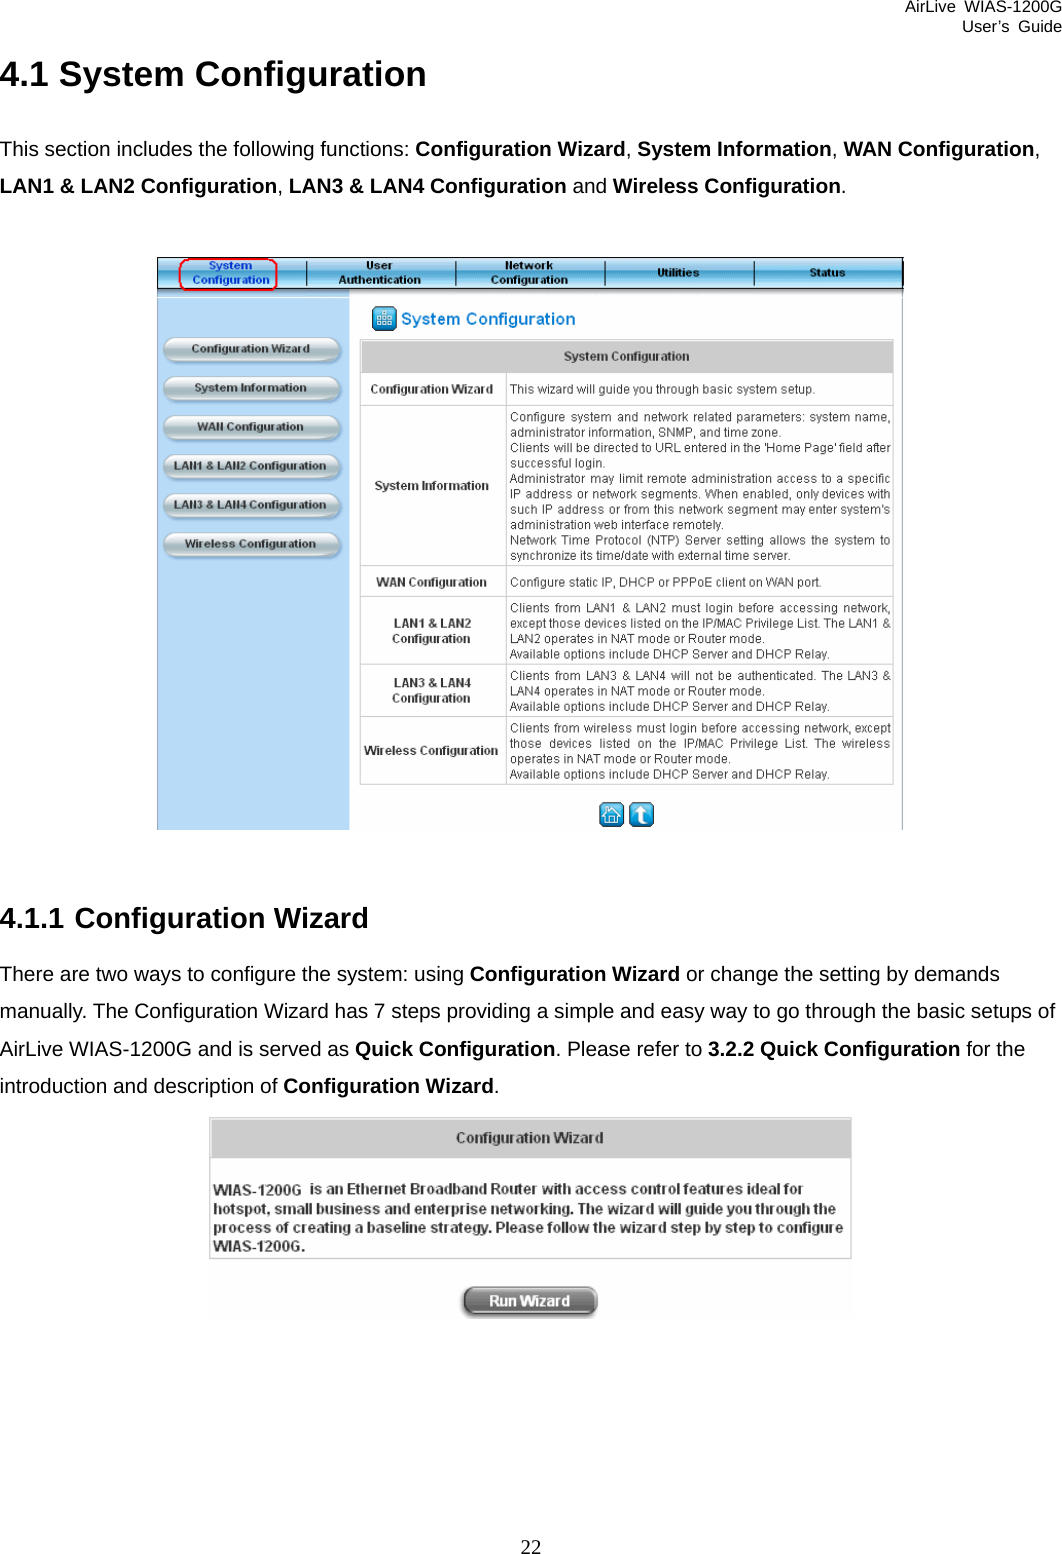 AirLive WIAS-1200G User’s Guide 22 4.1 System Configuration This section includes the following functions: Configuration Wizard, System Information, WAN Configuration, LAN1 &amp; LAN2 Configuration, LAN3 &amp; LAN4 Configuration and Wireless Configuration.    4.1.1 Configuration Wizard There are two ways to configure the system: using Configuration Wizard or change the setting by demands manually. The Configuration Wizard has 7 steps providing a simple and easy way to go through the basic setups of AirLive WIAS-1200G and is served as Quick Configuration. Please refer to 3.2.2 Quick Configuration for the introduction and description of Configuration Wizard.  